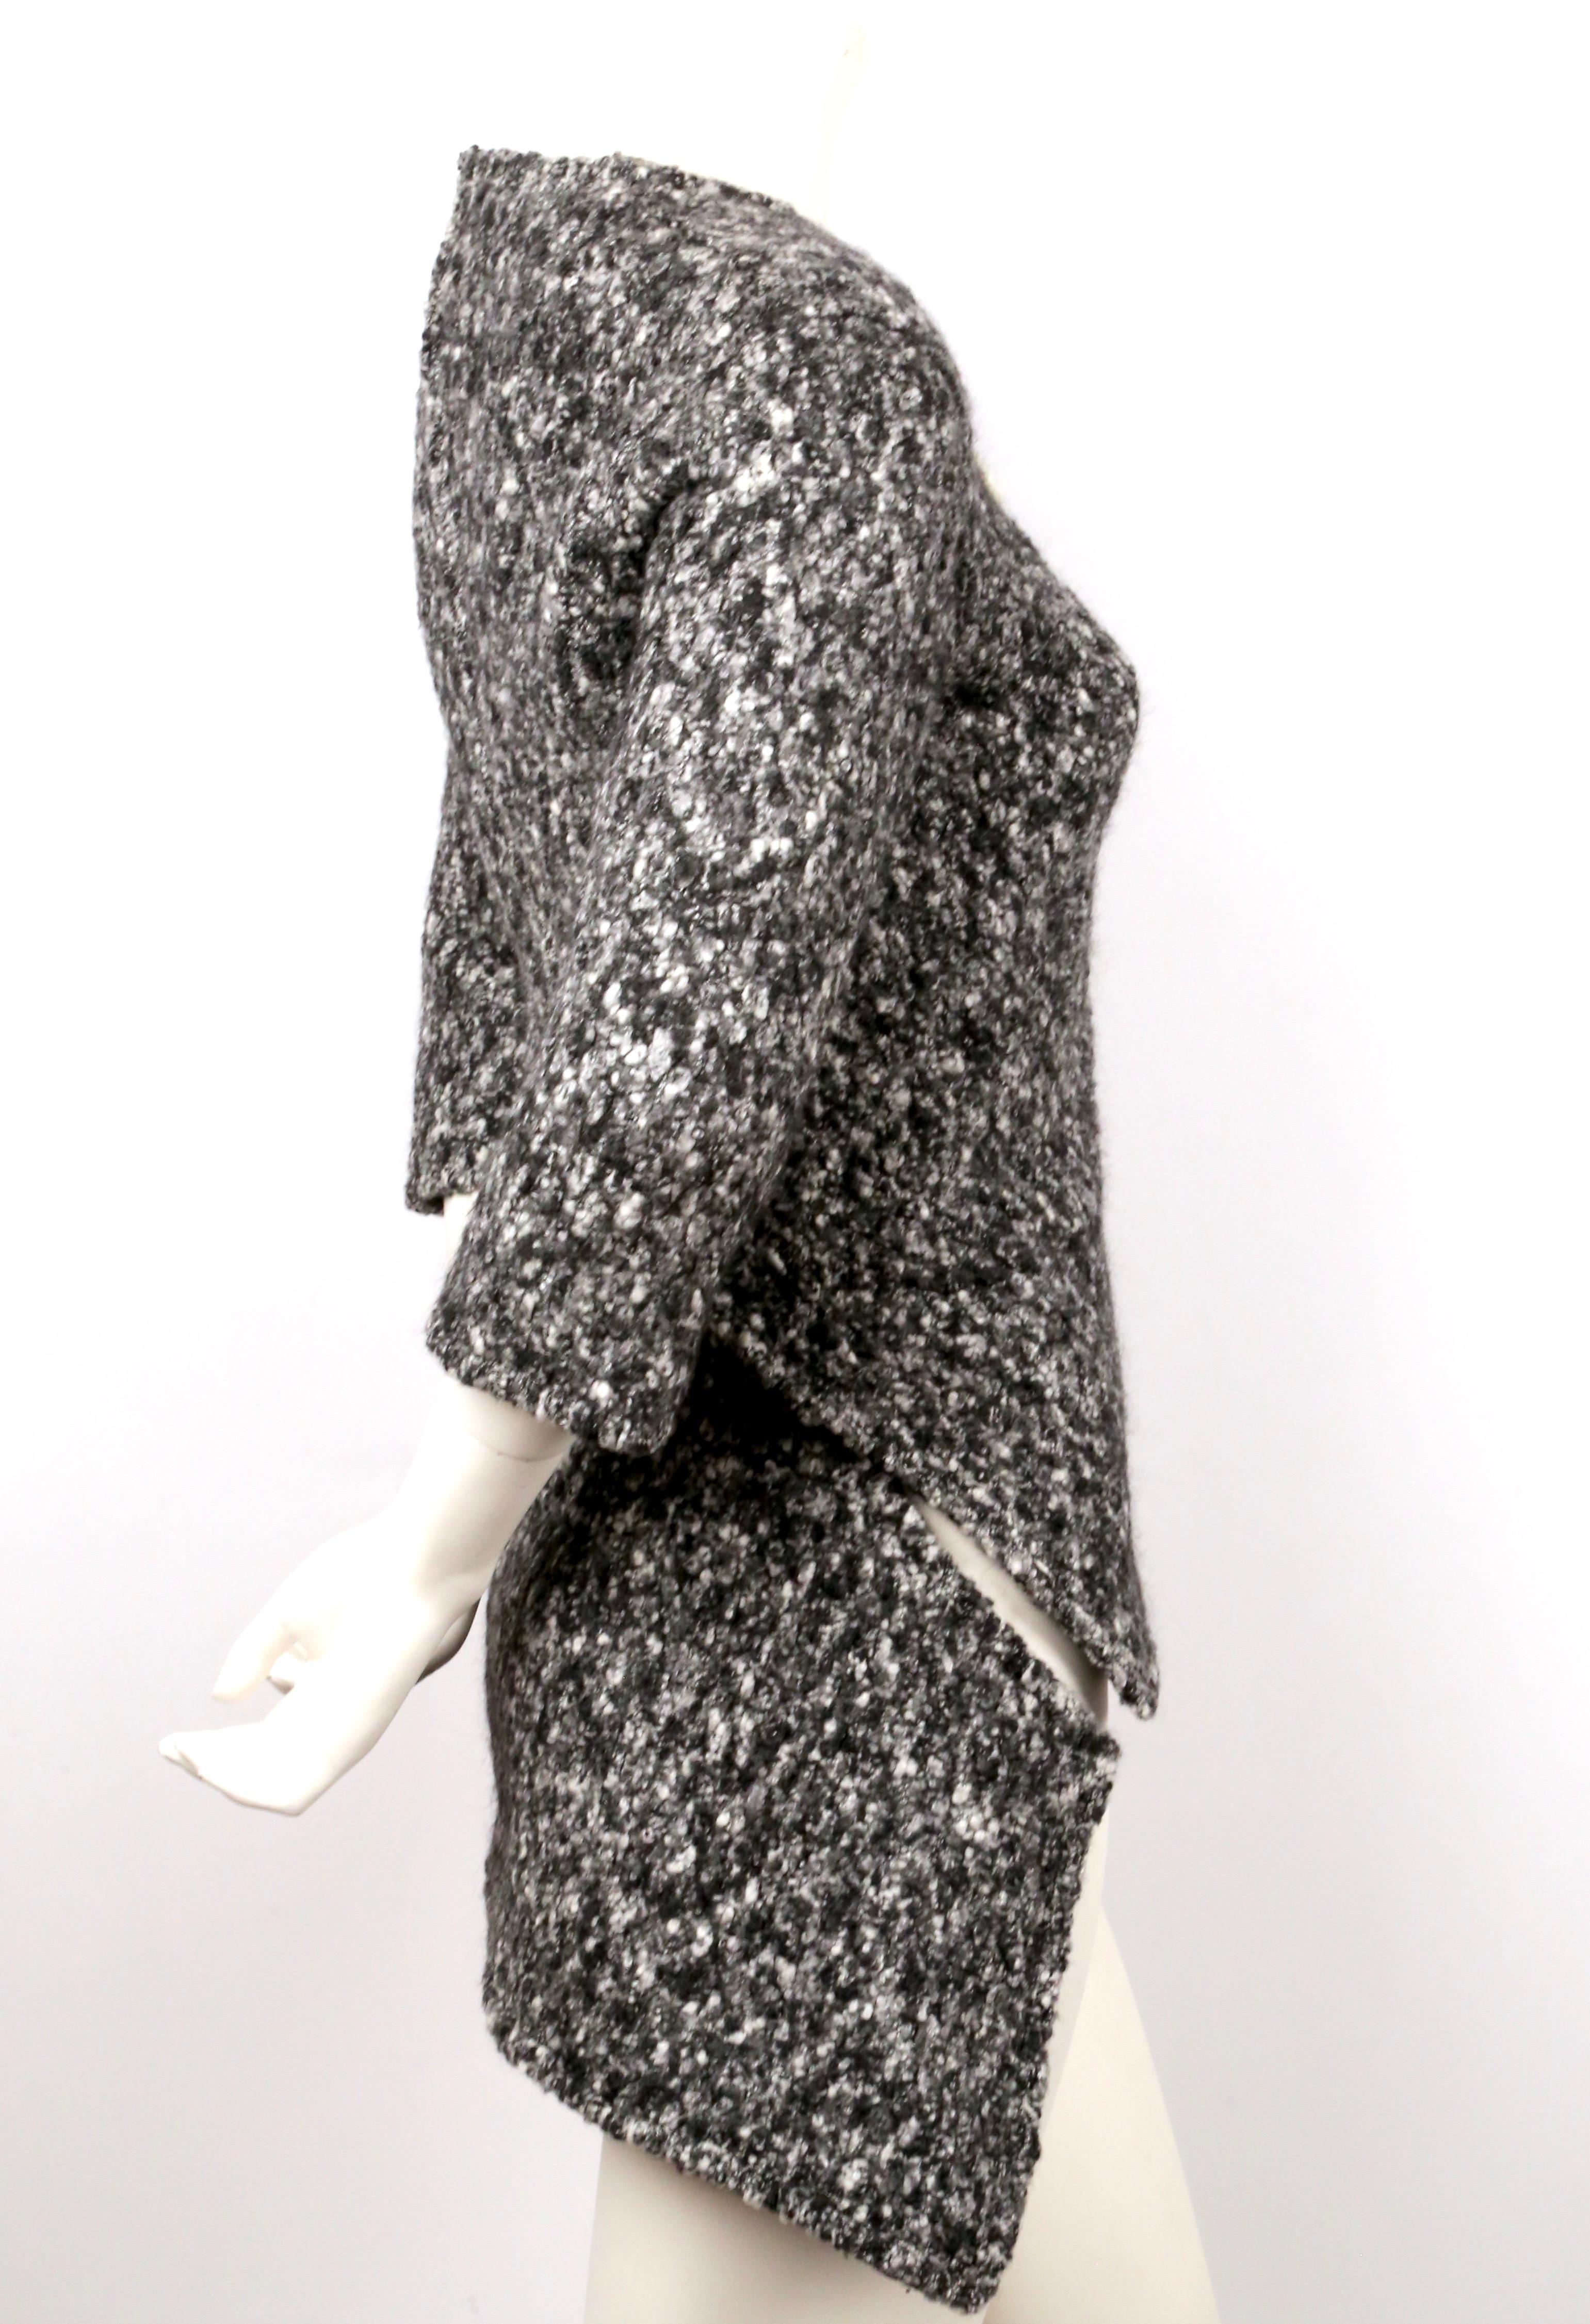 Grey marled boucle knit sweater with asymmetrical snap closure designed by Phoebe Philo for Celine exactly as seen on the 2014 runway. Labeled a French size 38. Approximate measurements: shoulder 16